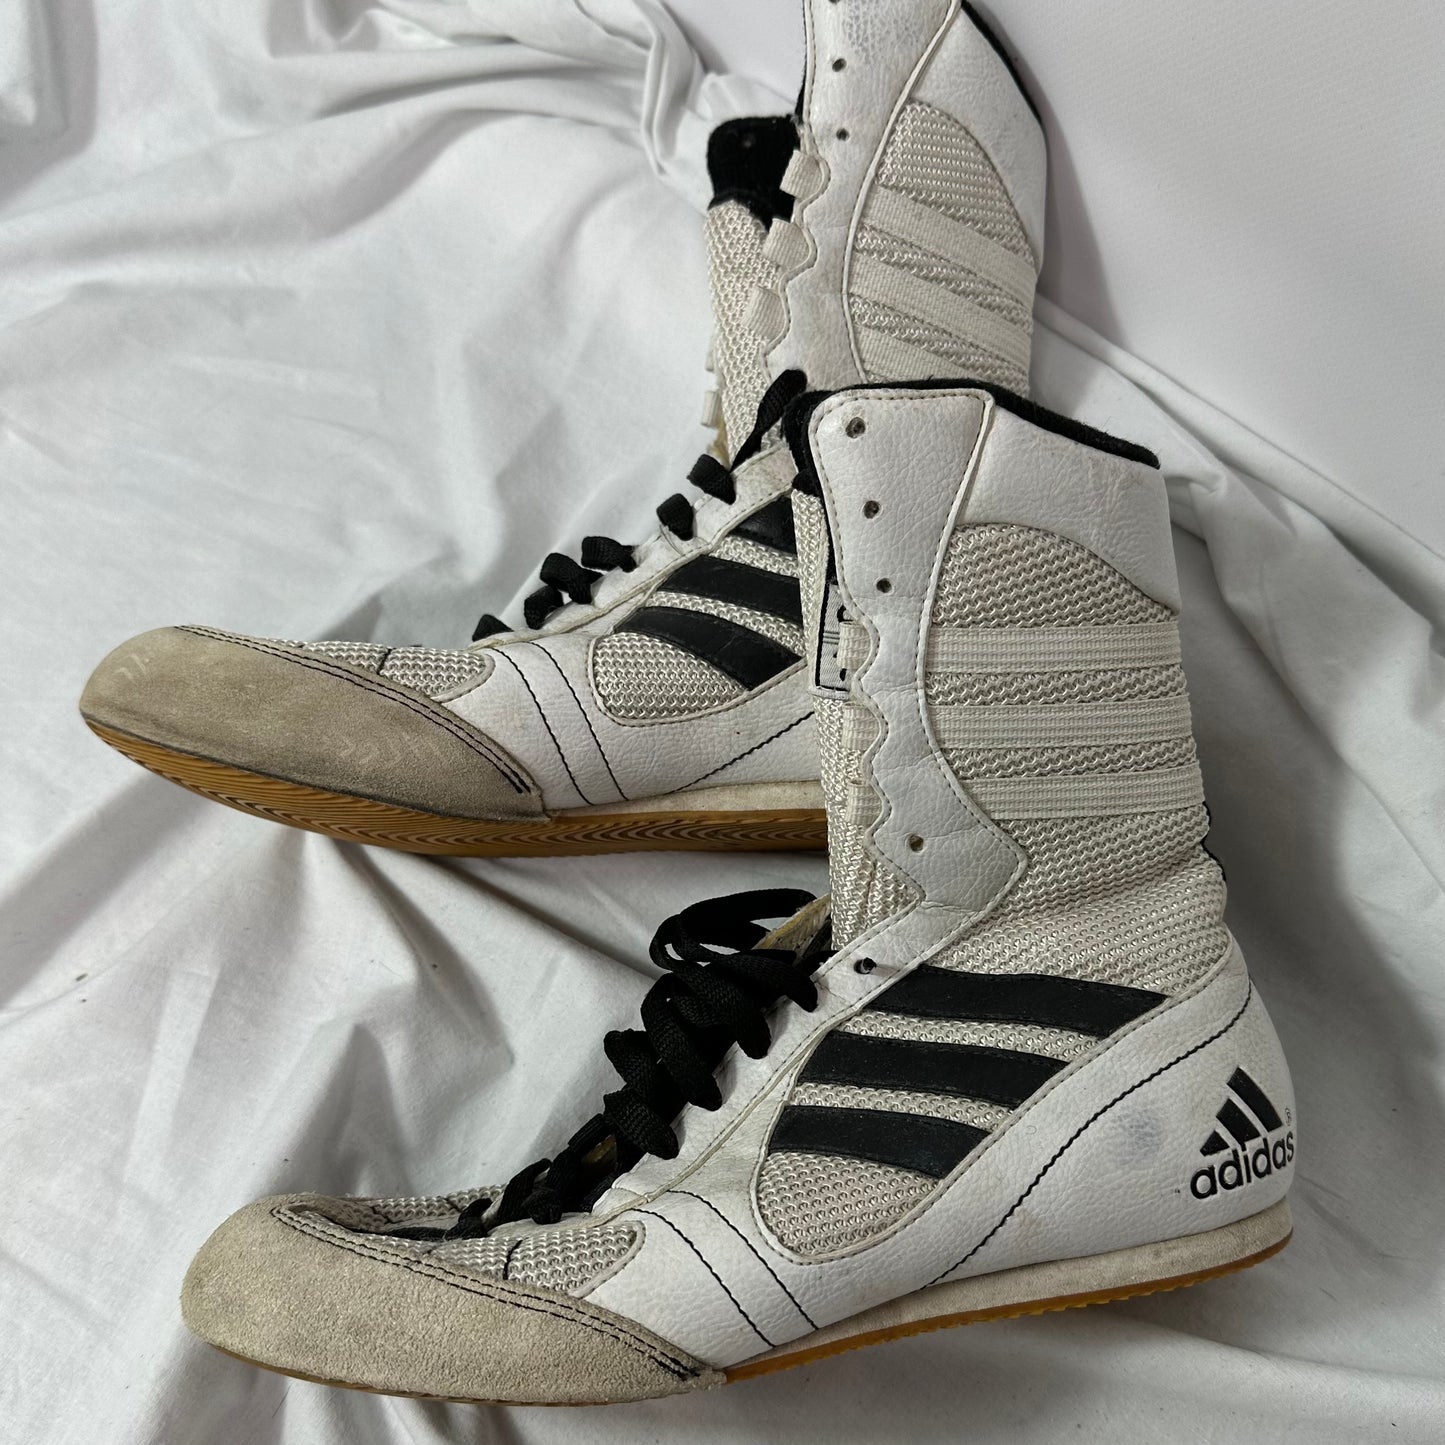 Adidas 2000s boxing boots